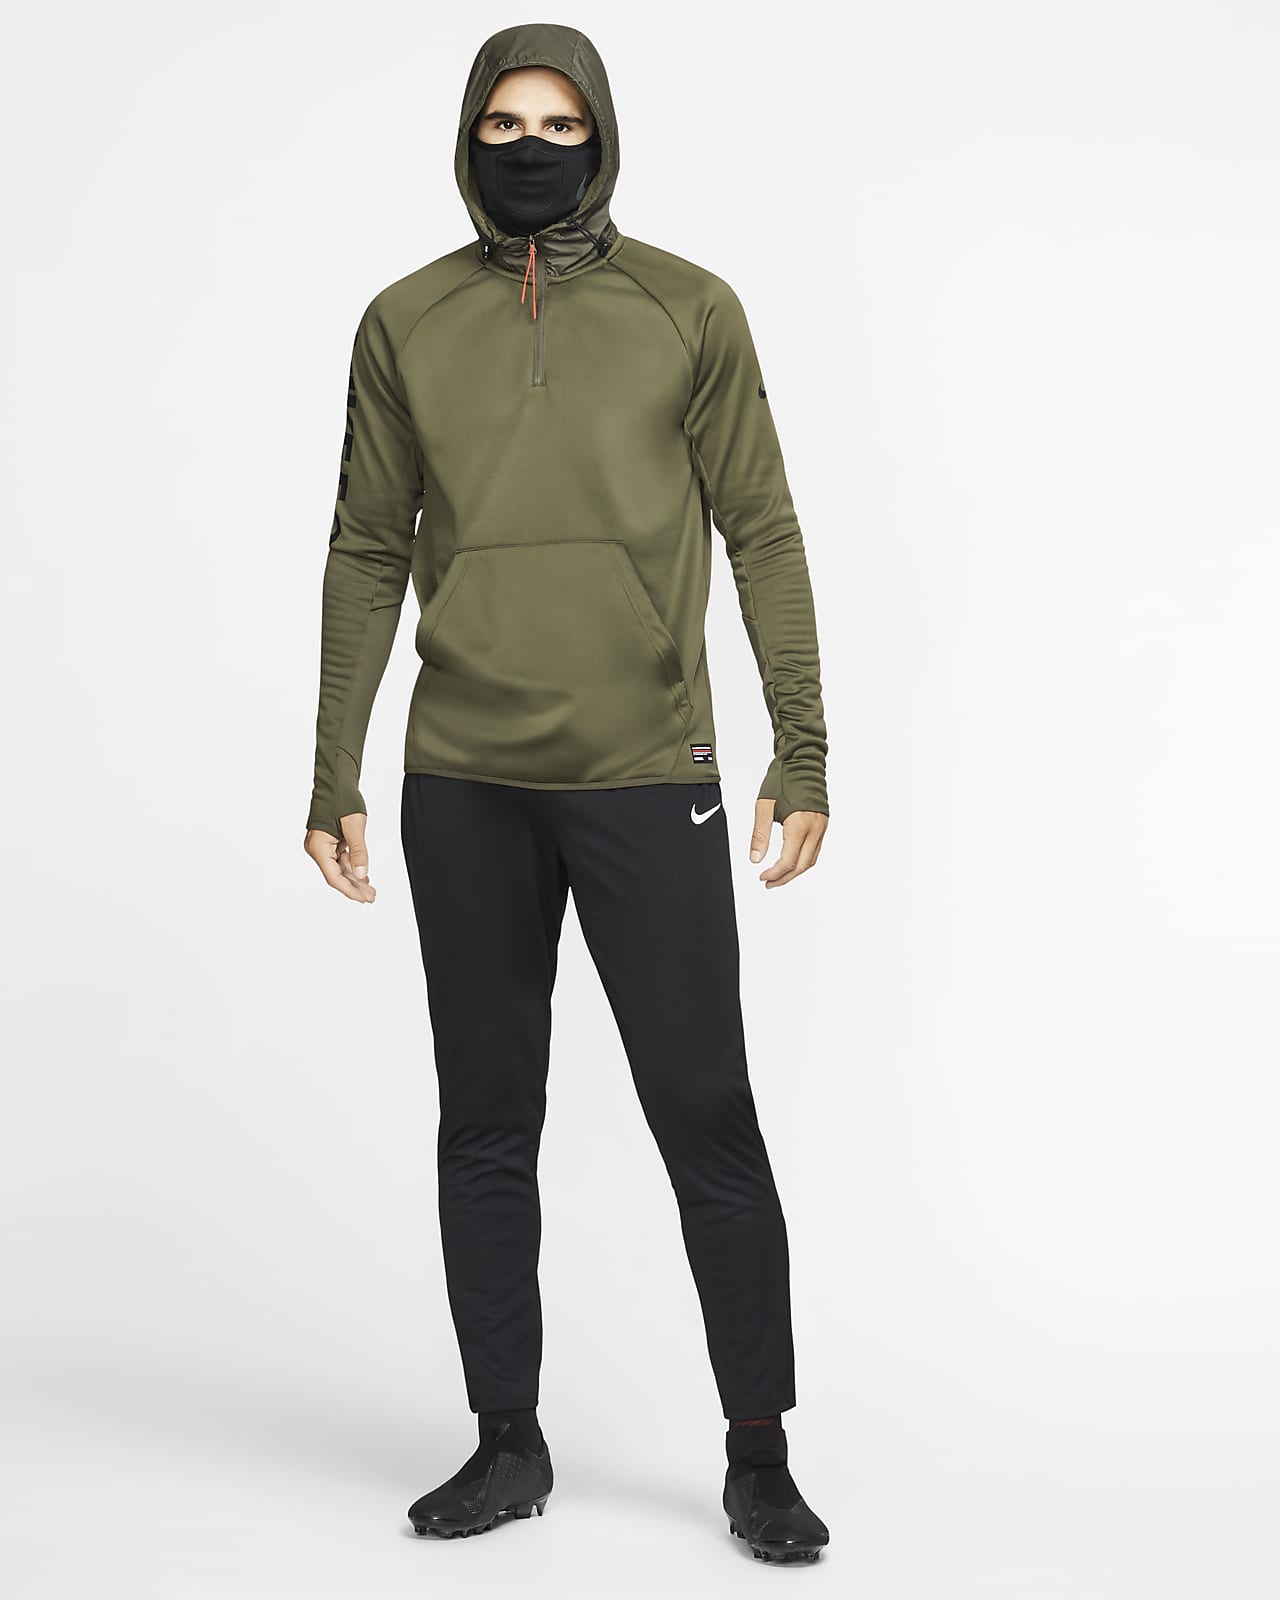 nike snood review